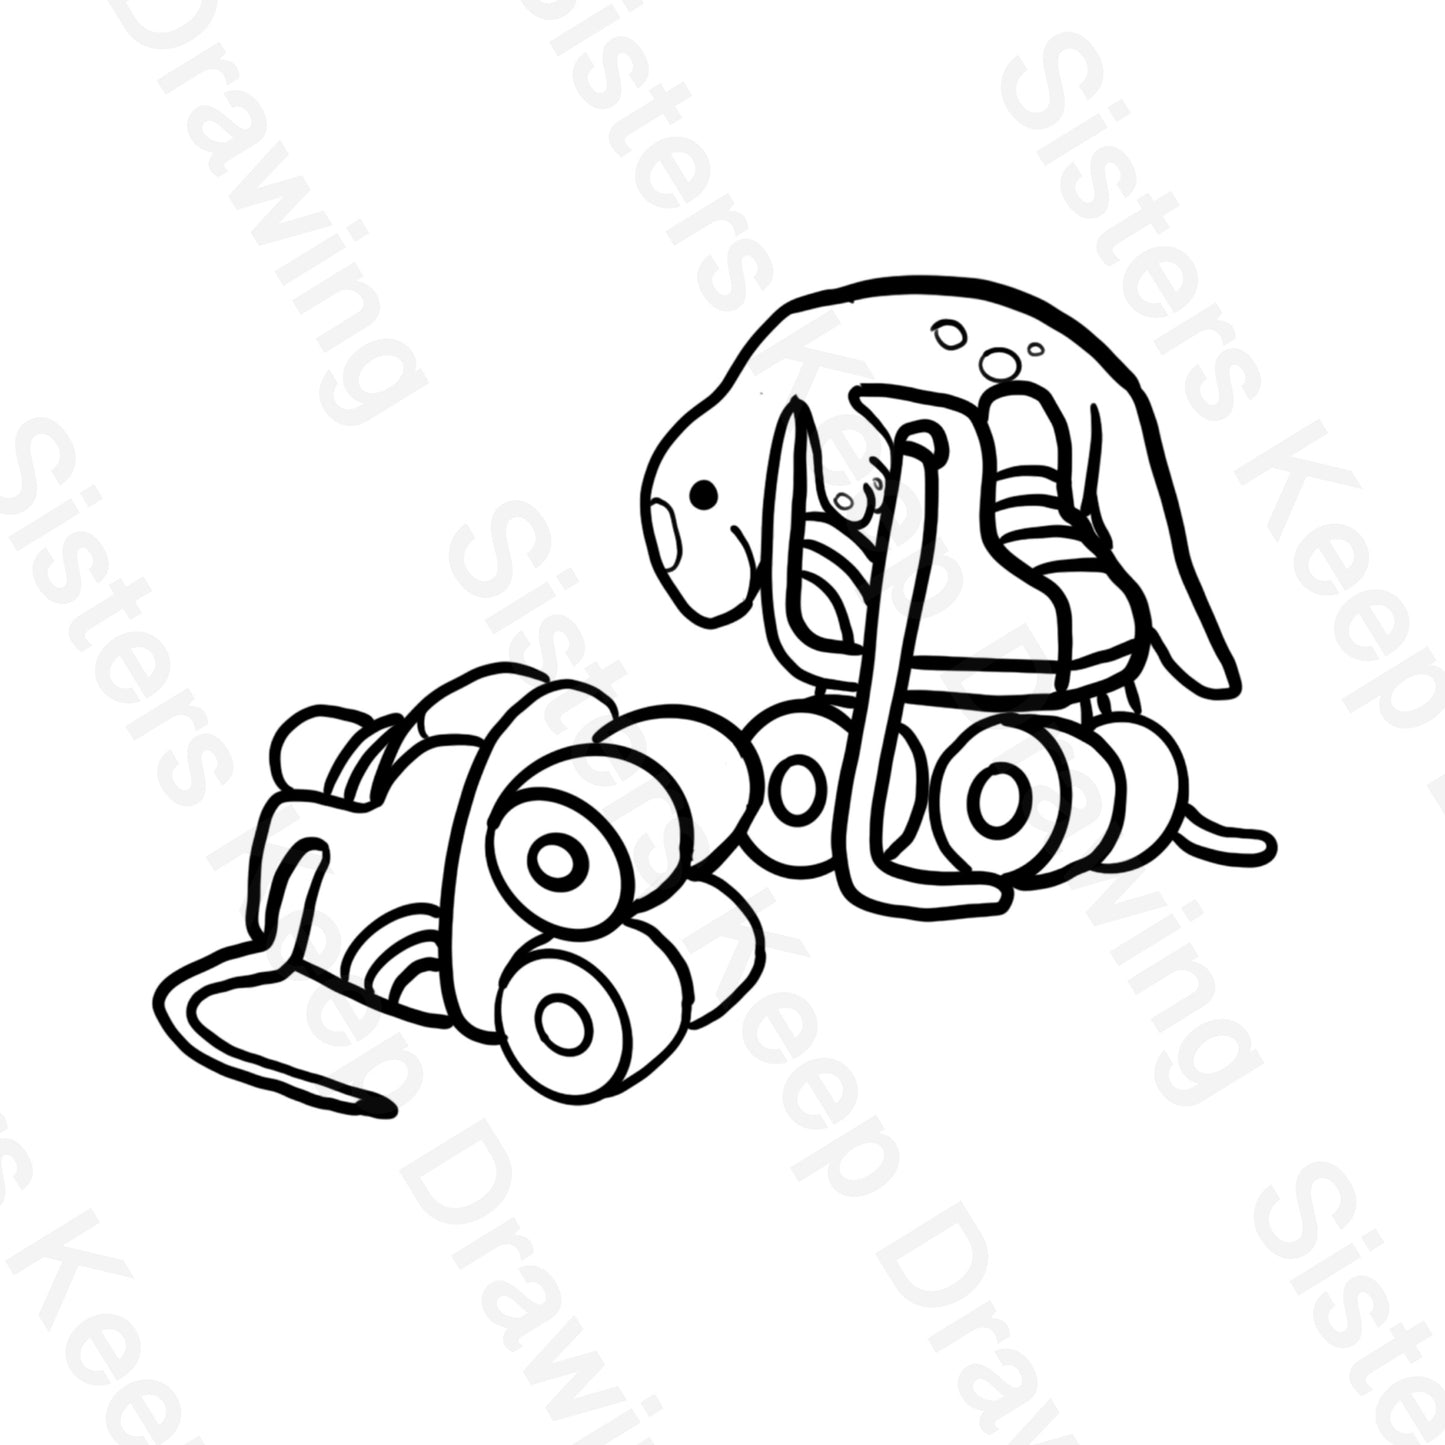 Rollerskates and Sticky gecko - Blue Inspired - Tattoo Transparent Permission PNG- (Copy) the